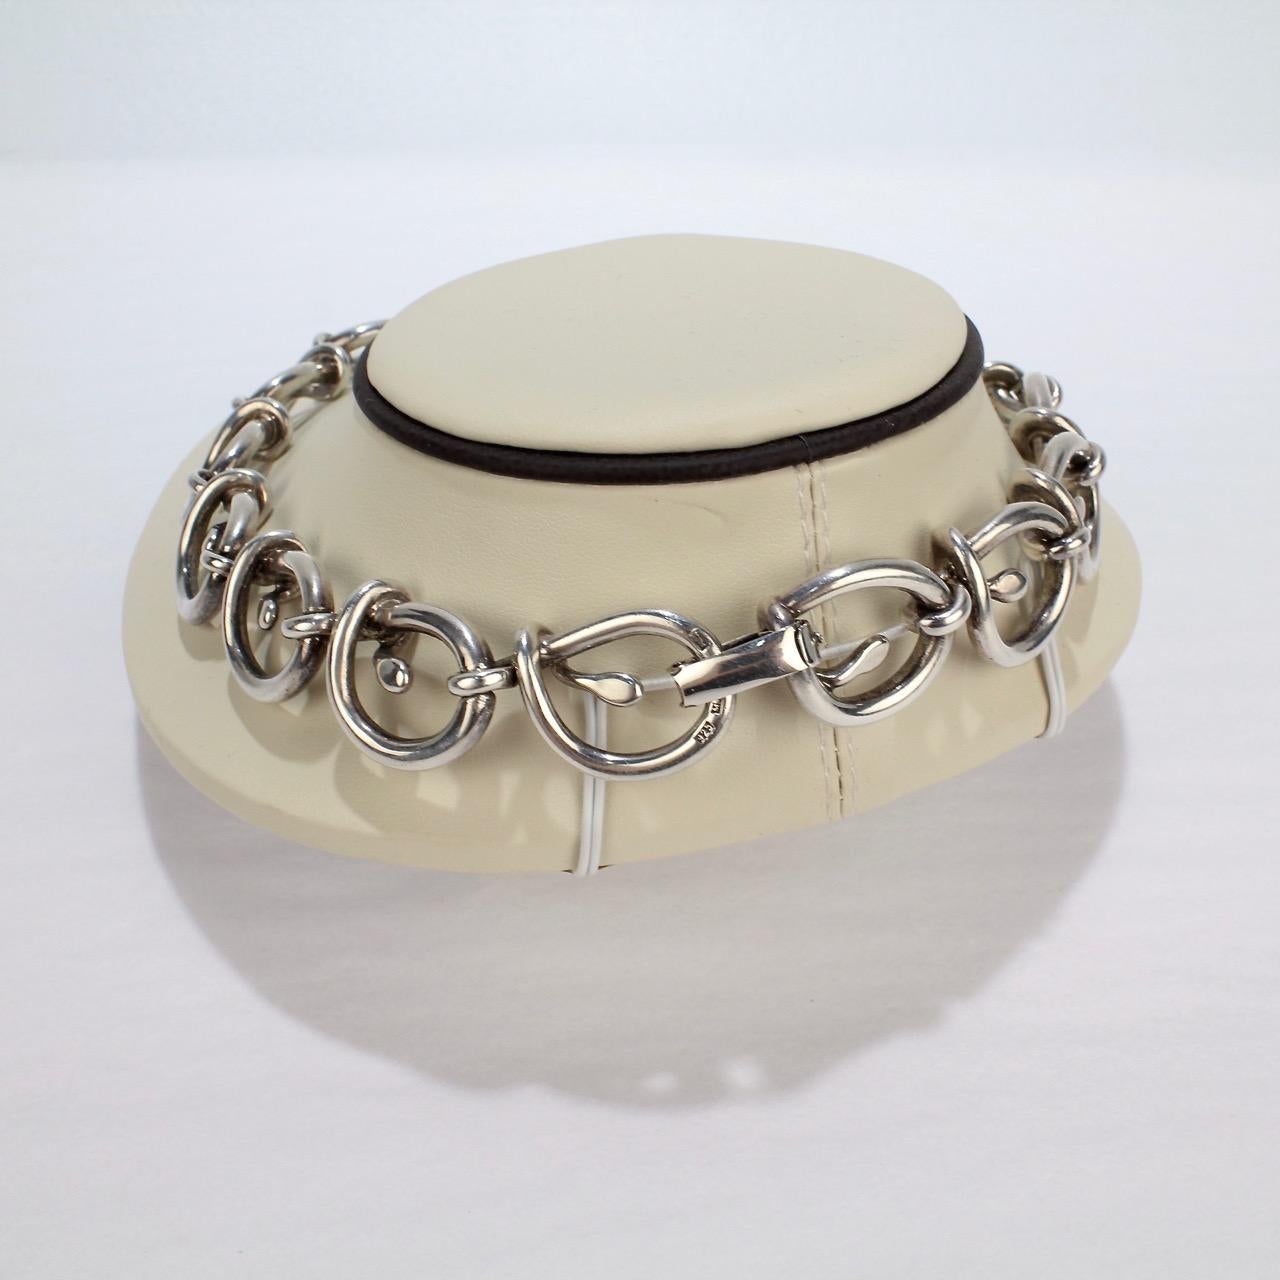 Modern Heavy Link Vintage Mexican Sterling Silver Dog Collar Choker Necklace by Tane